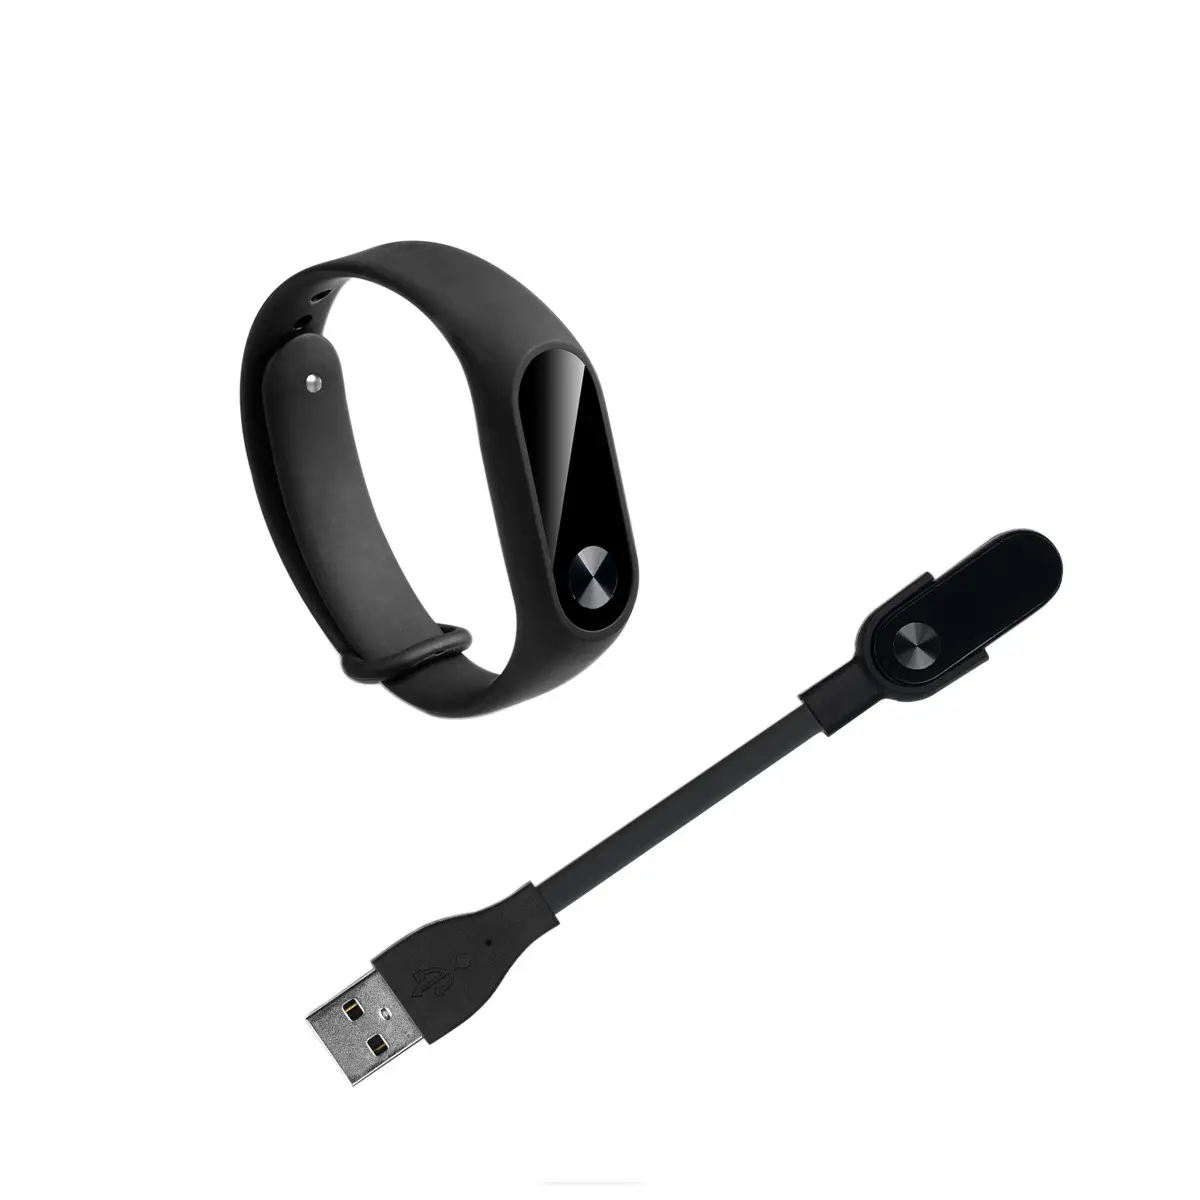 Qiman TPE USB Data Dock Smartwatch Charging Cable for Xiaomi Mi Band 2 3 4 5 Smart Bracelet Charger